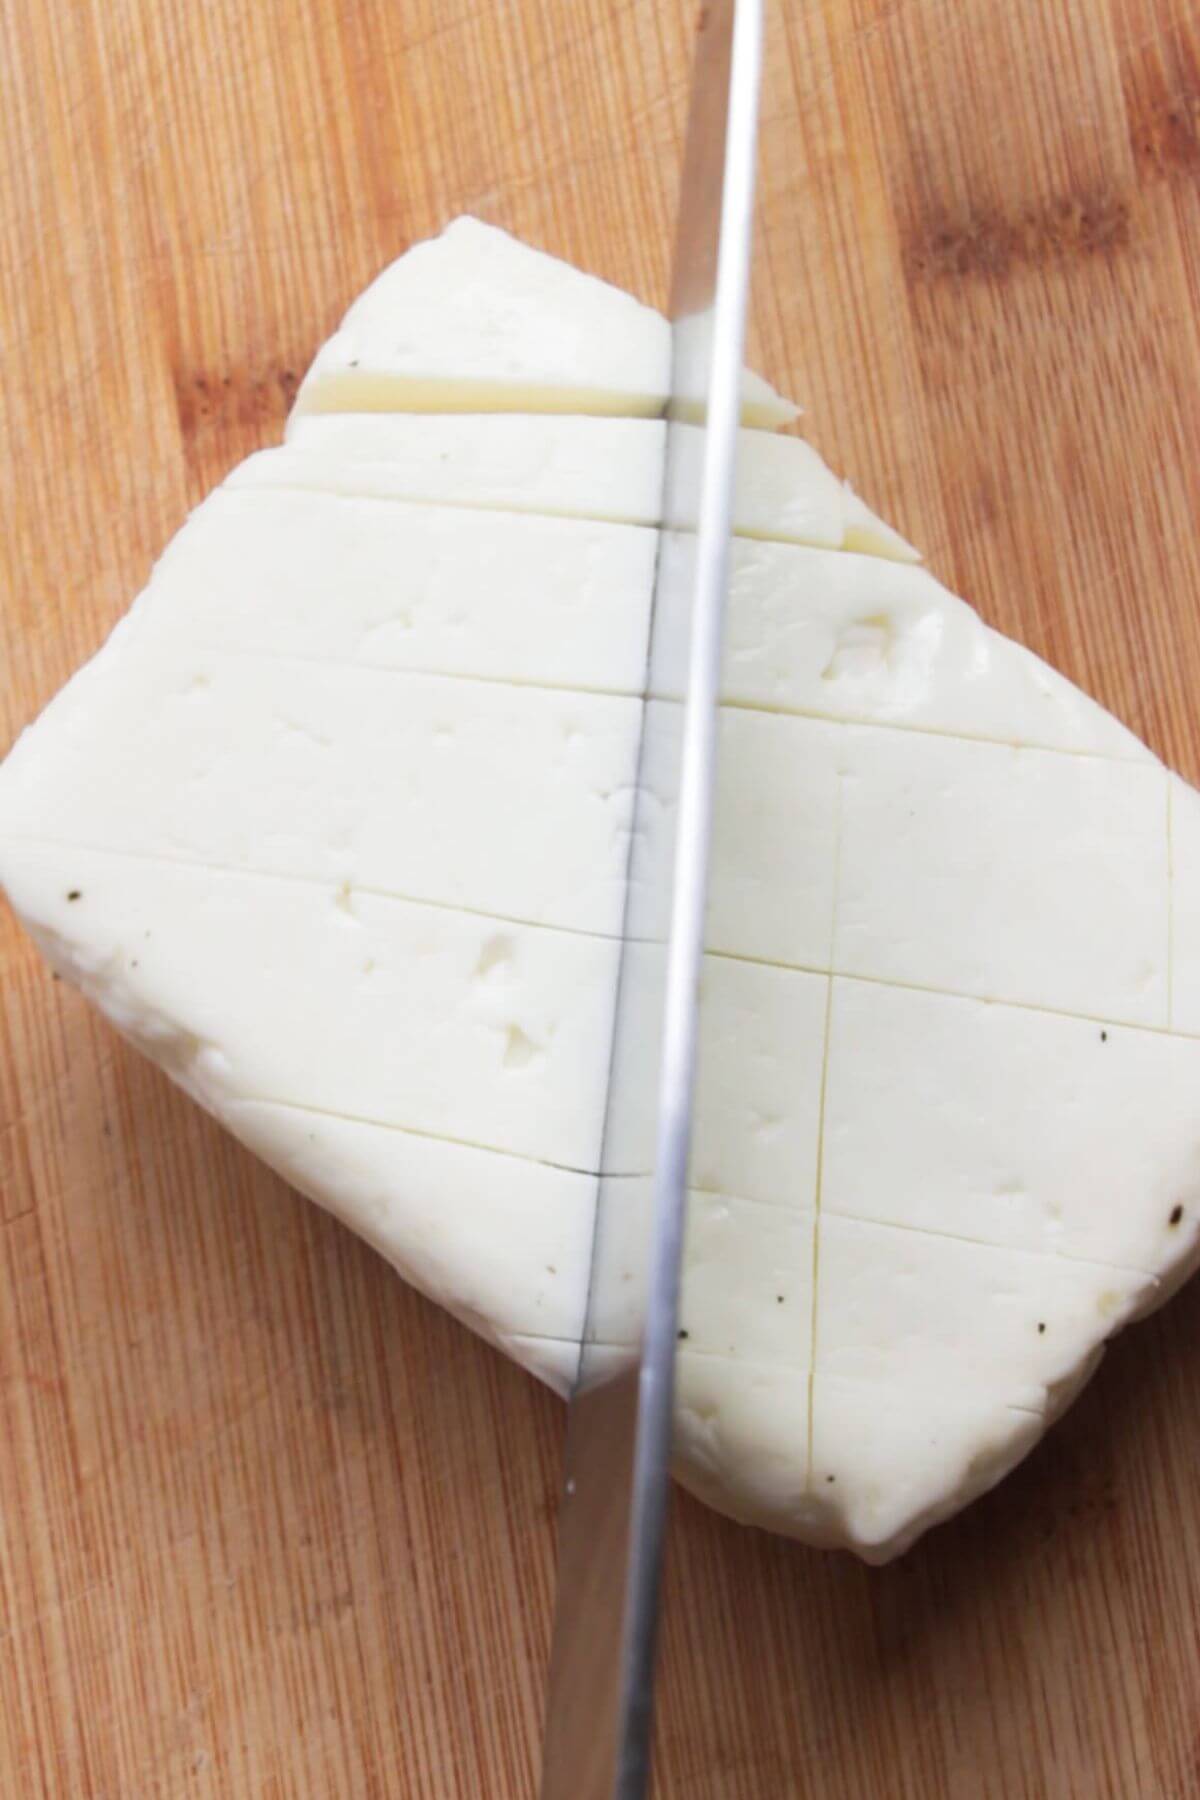 A knife cutting criss cross lines into a whole block of halloumi on a wooden board.